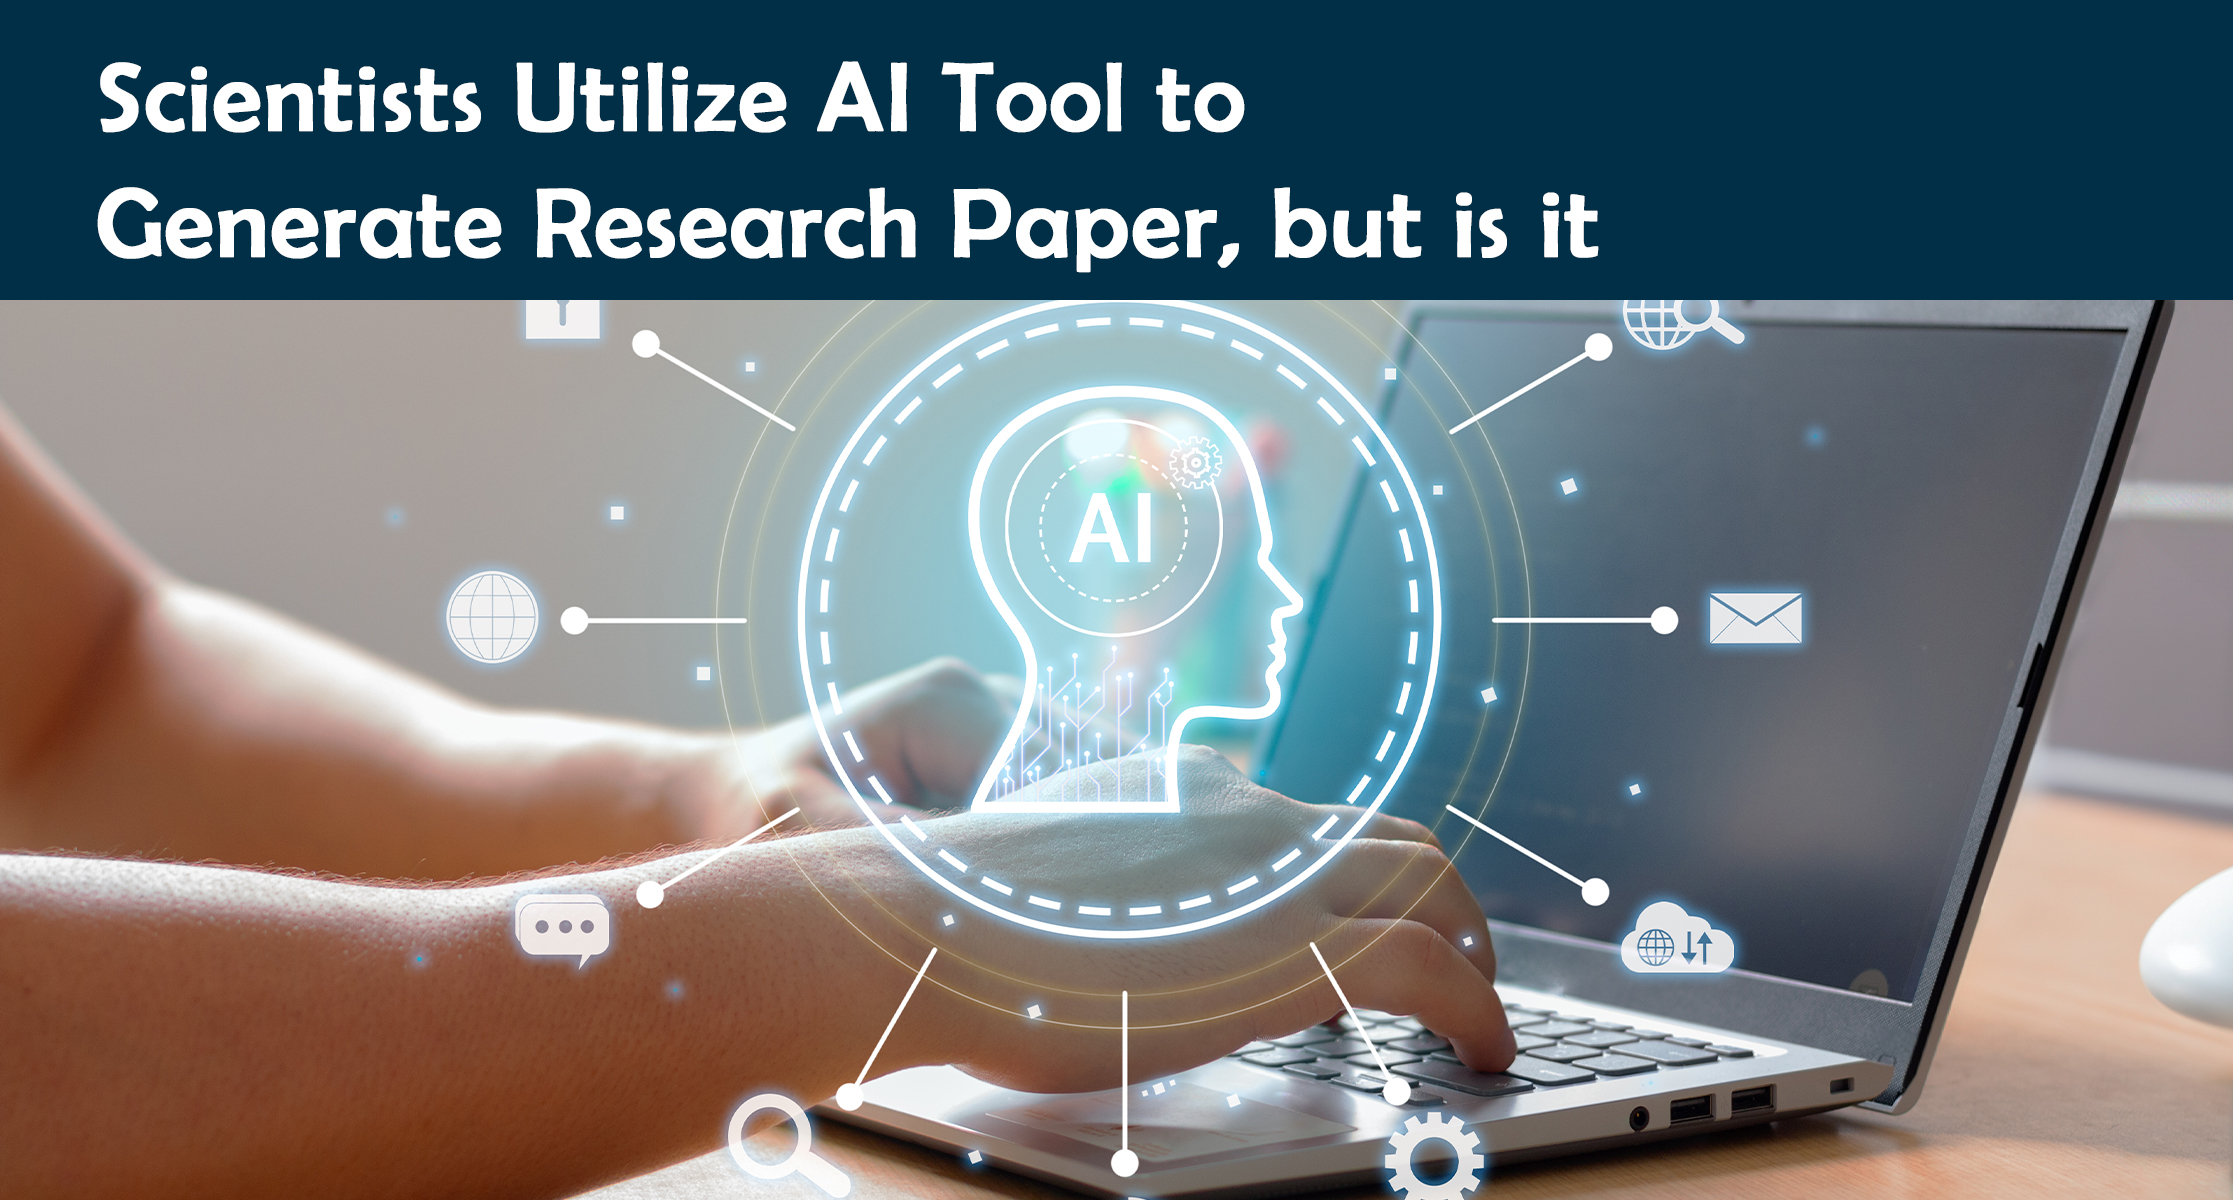 Scientists Utilize AI Tool to Generate Research Paper, but is it